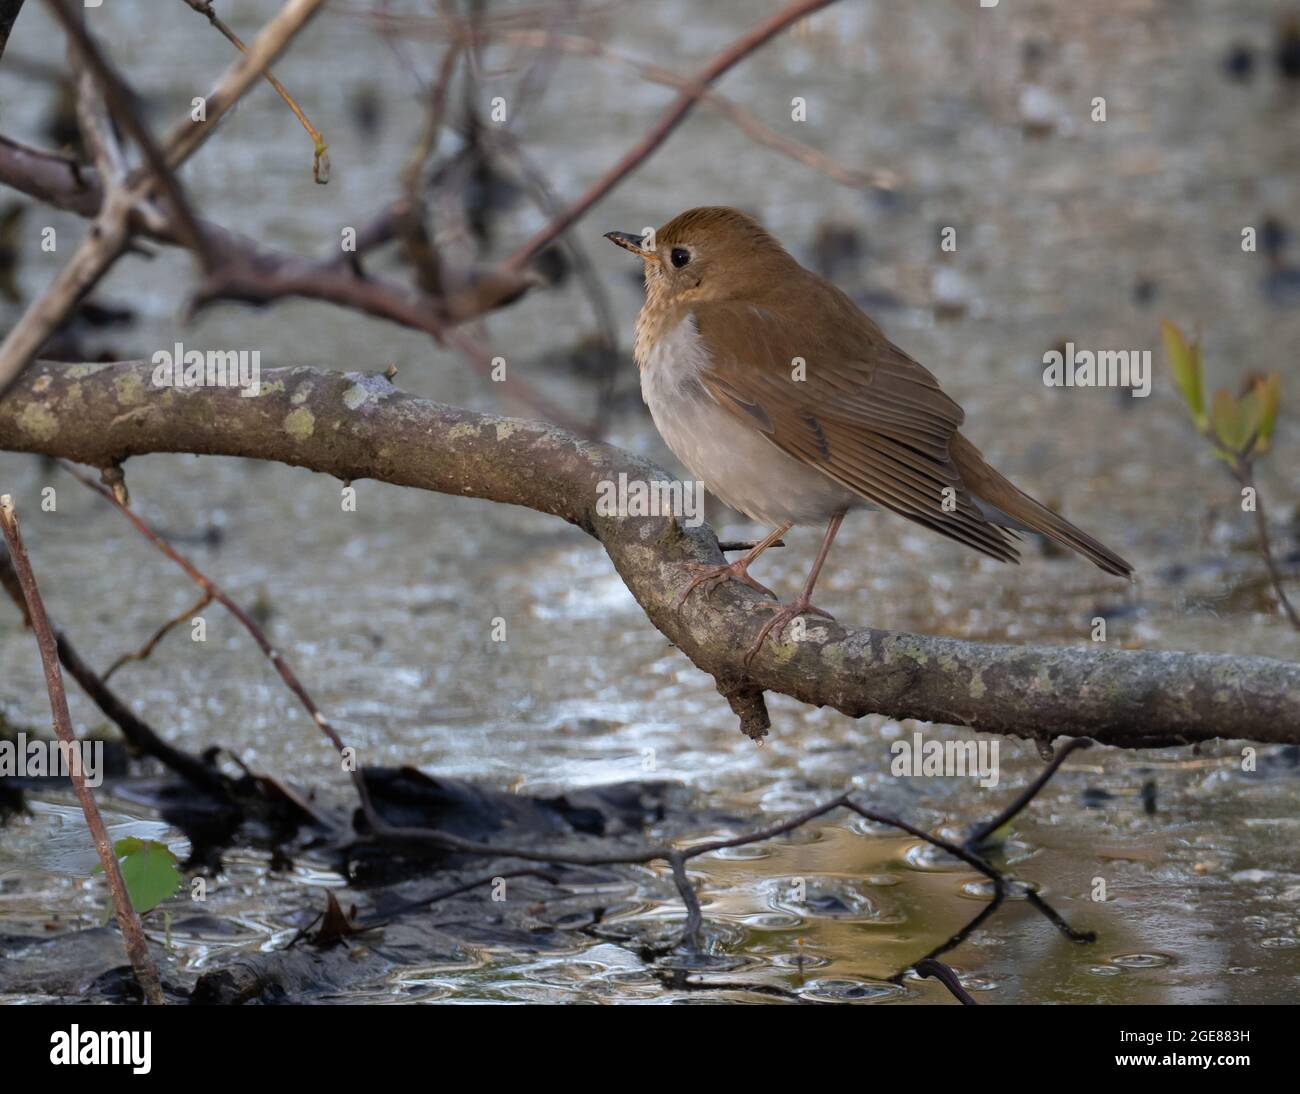 Veery perched on branch in wetland Stock Photo